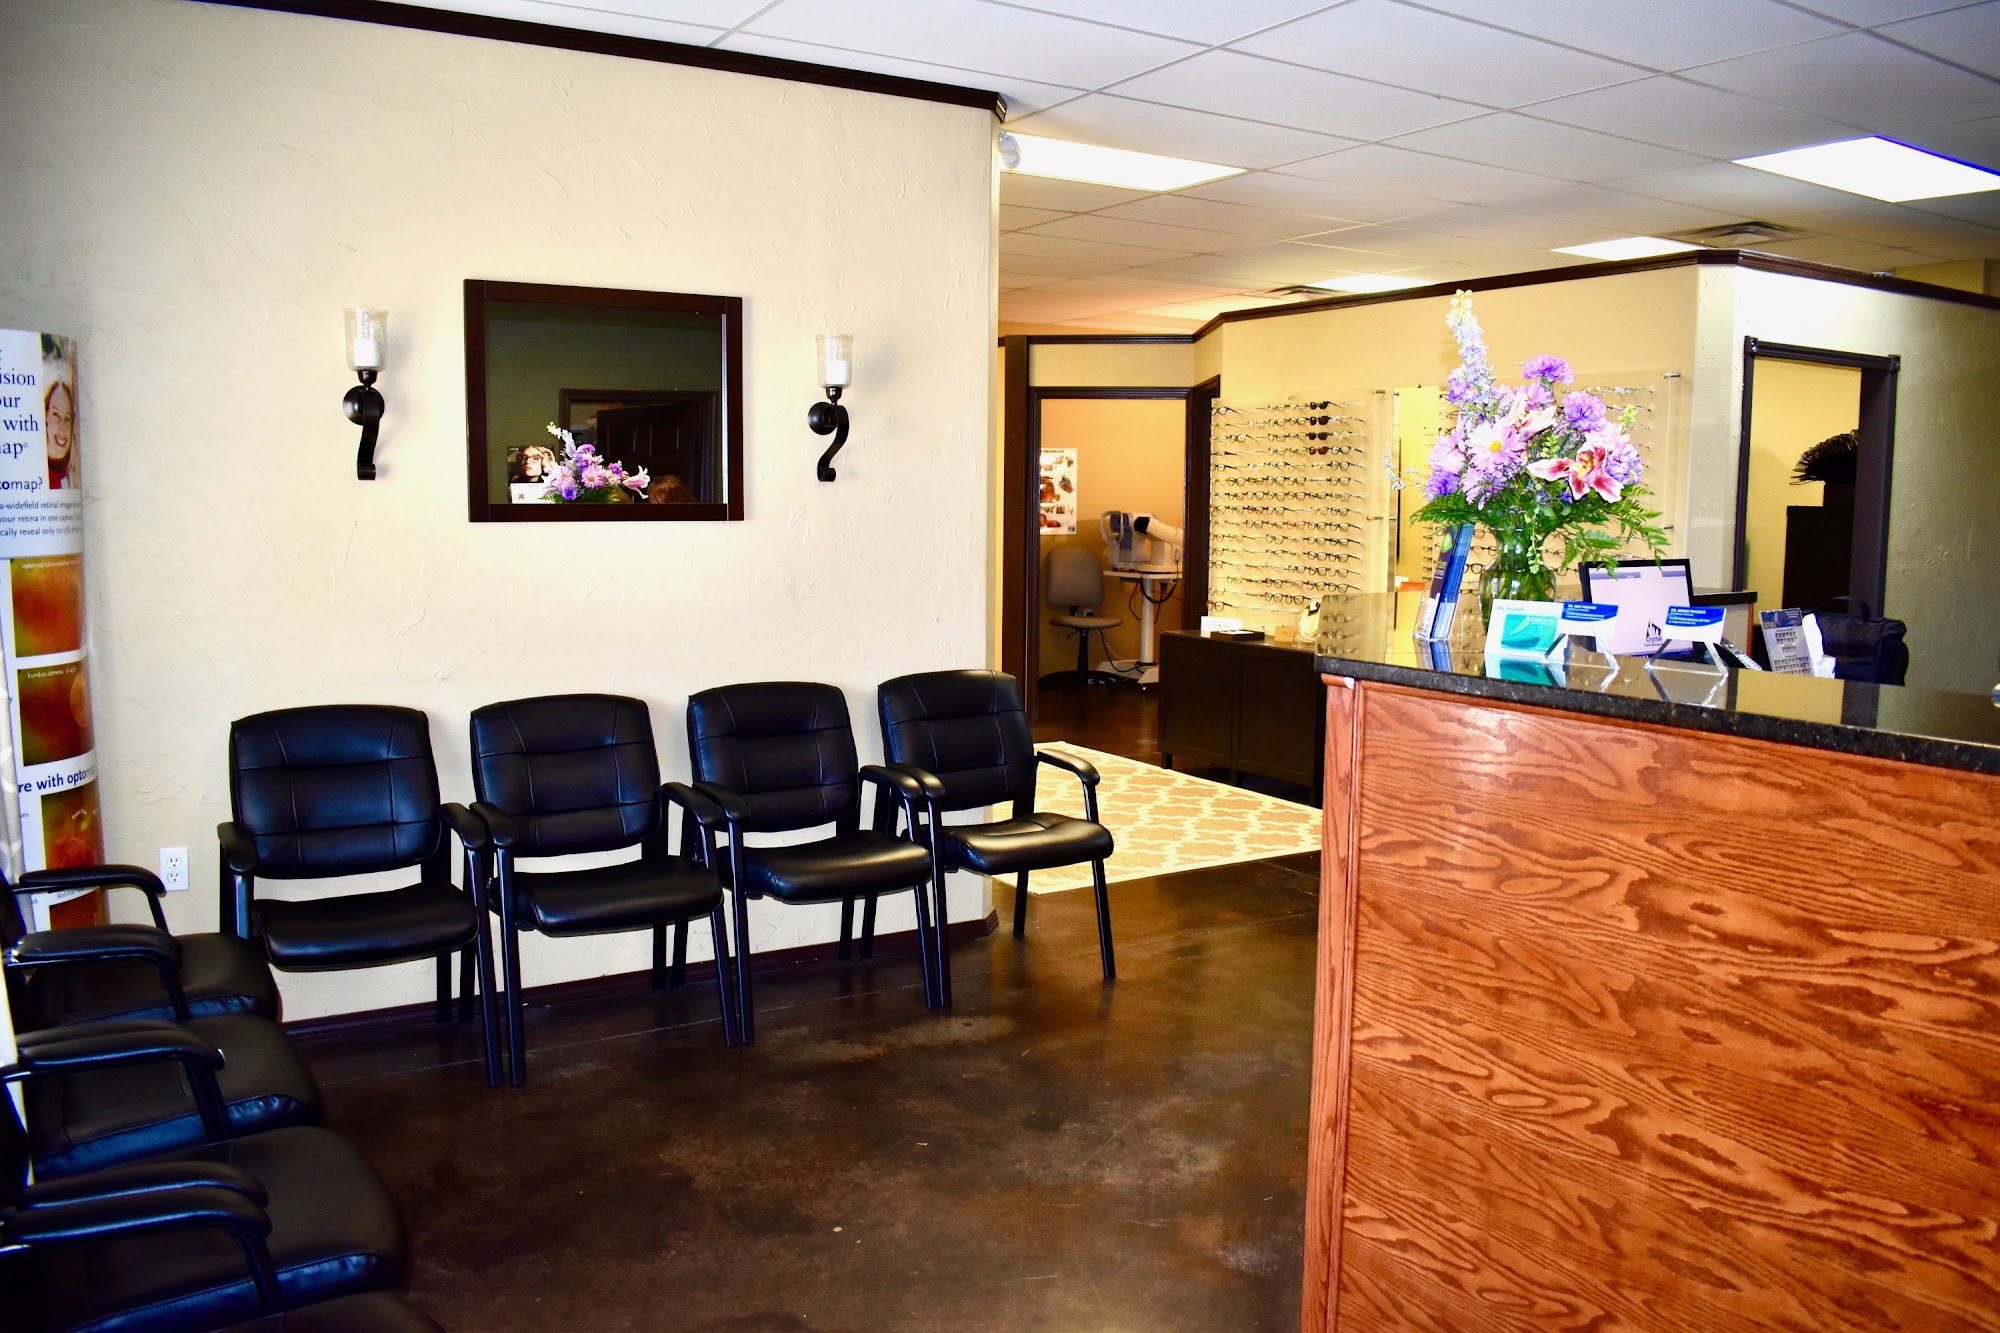 Complete Eye Care - Newcastle 918 NW 32nd St, Newcastle Oklahoma 73065